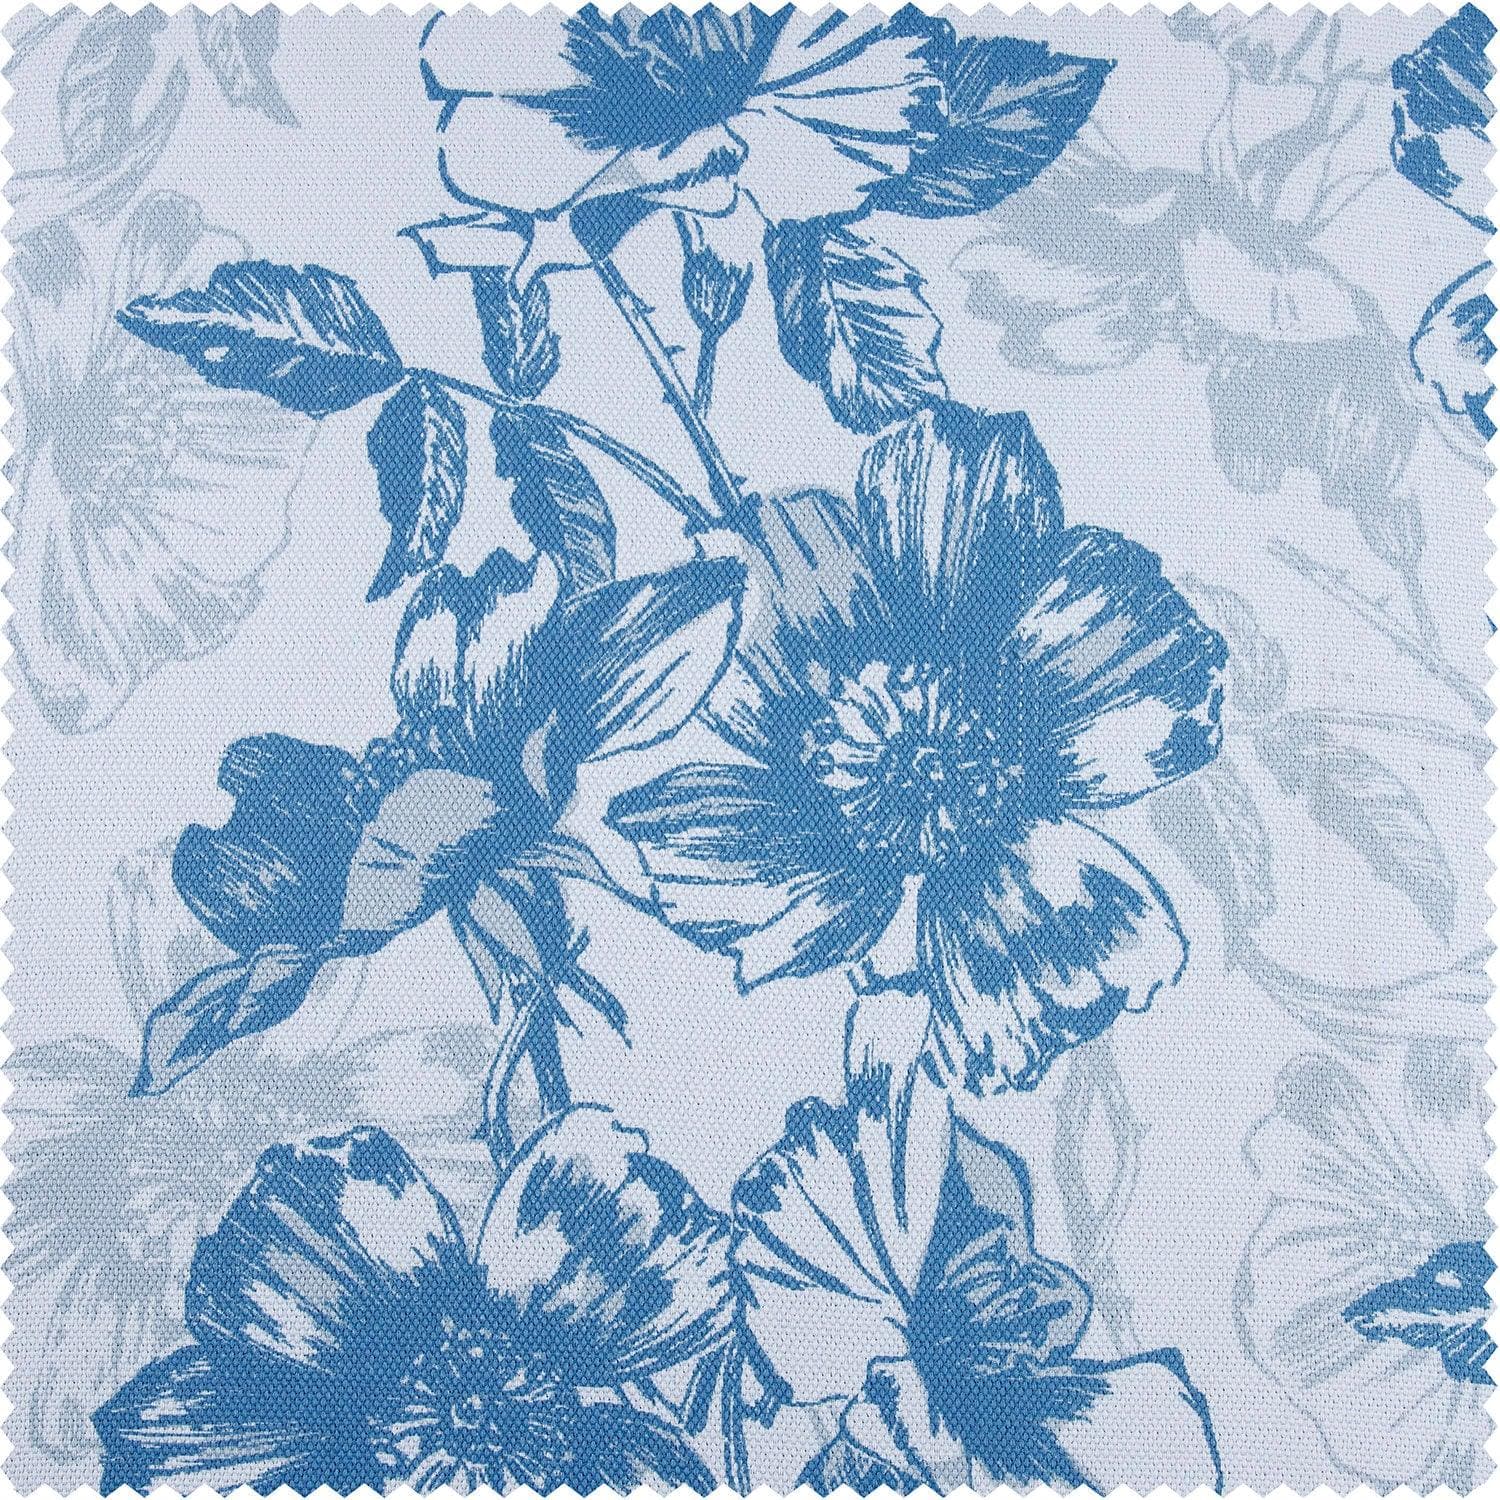 Blue Poppy Printed Faux Linen Swatch